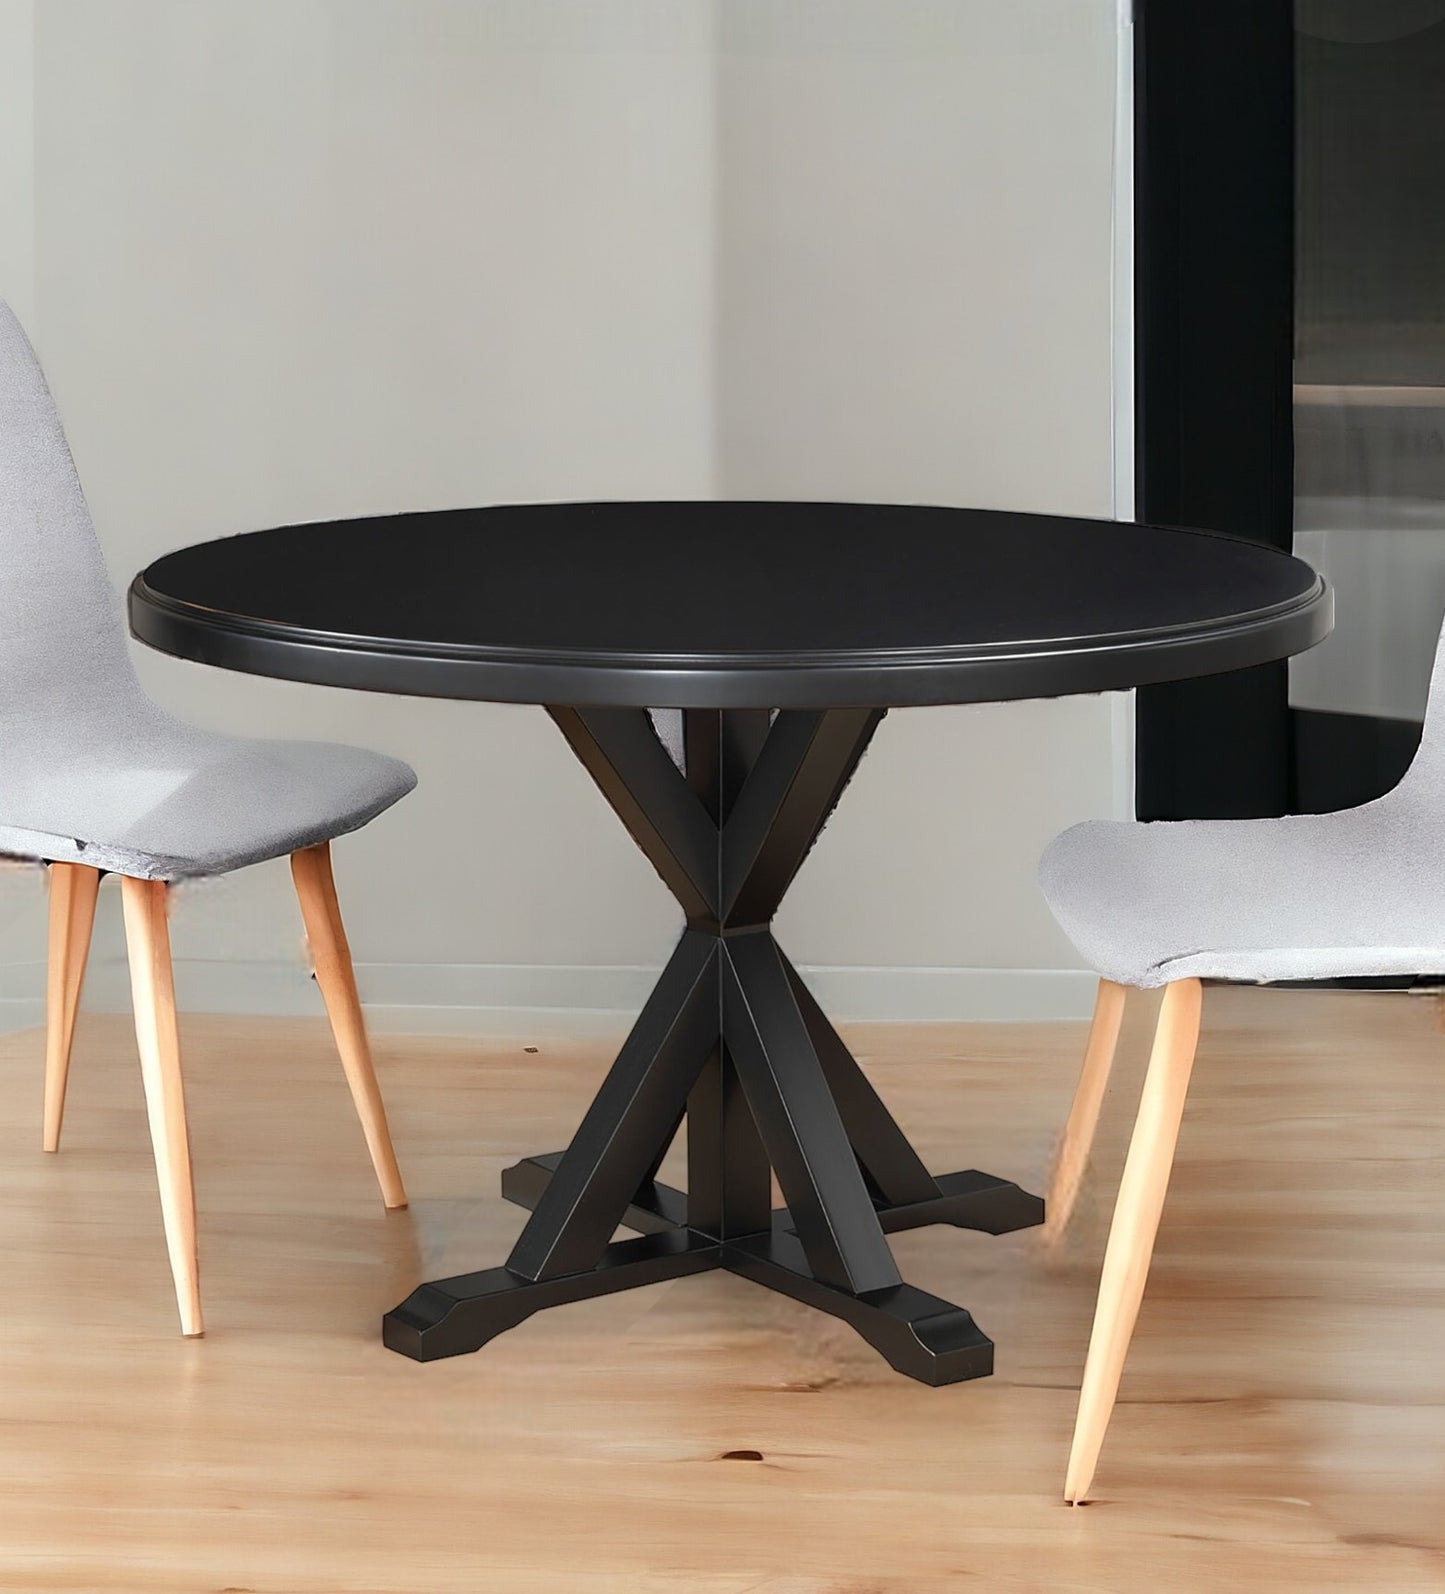 48" Black Rounded Solid Manufactured Wood And Solid Wood Pedestal Base Dining Table